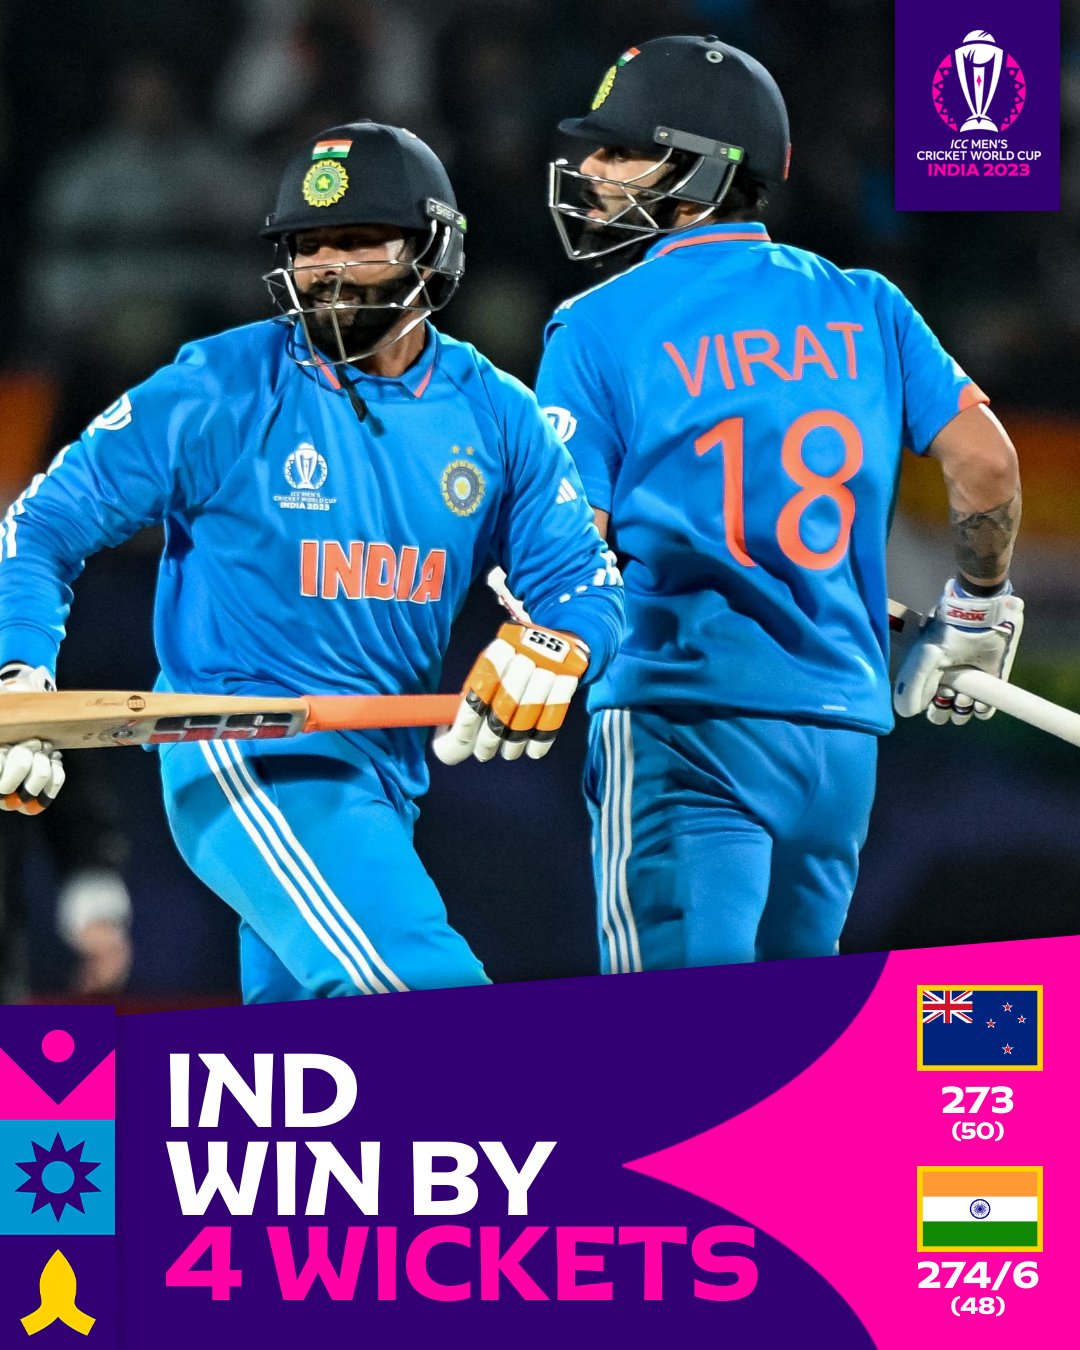 India won the match by 4 wickets New Zealand.